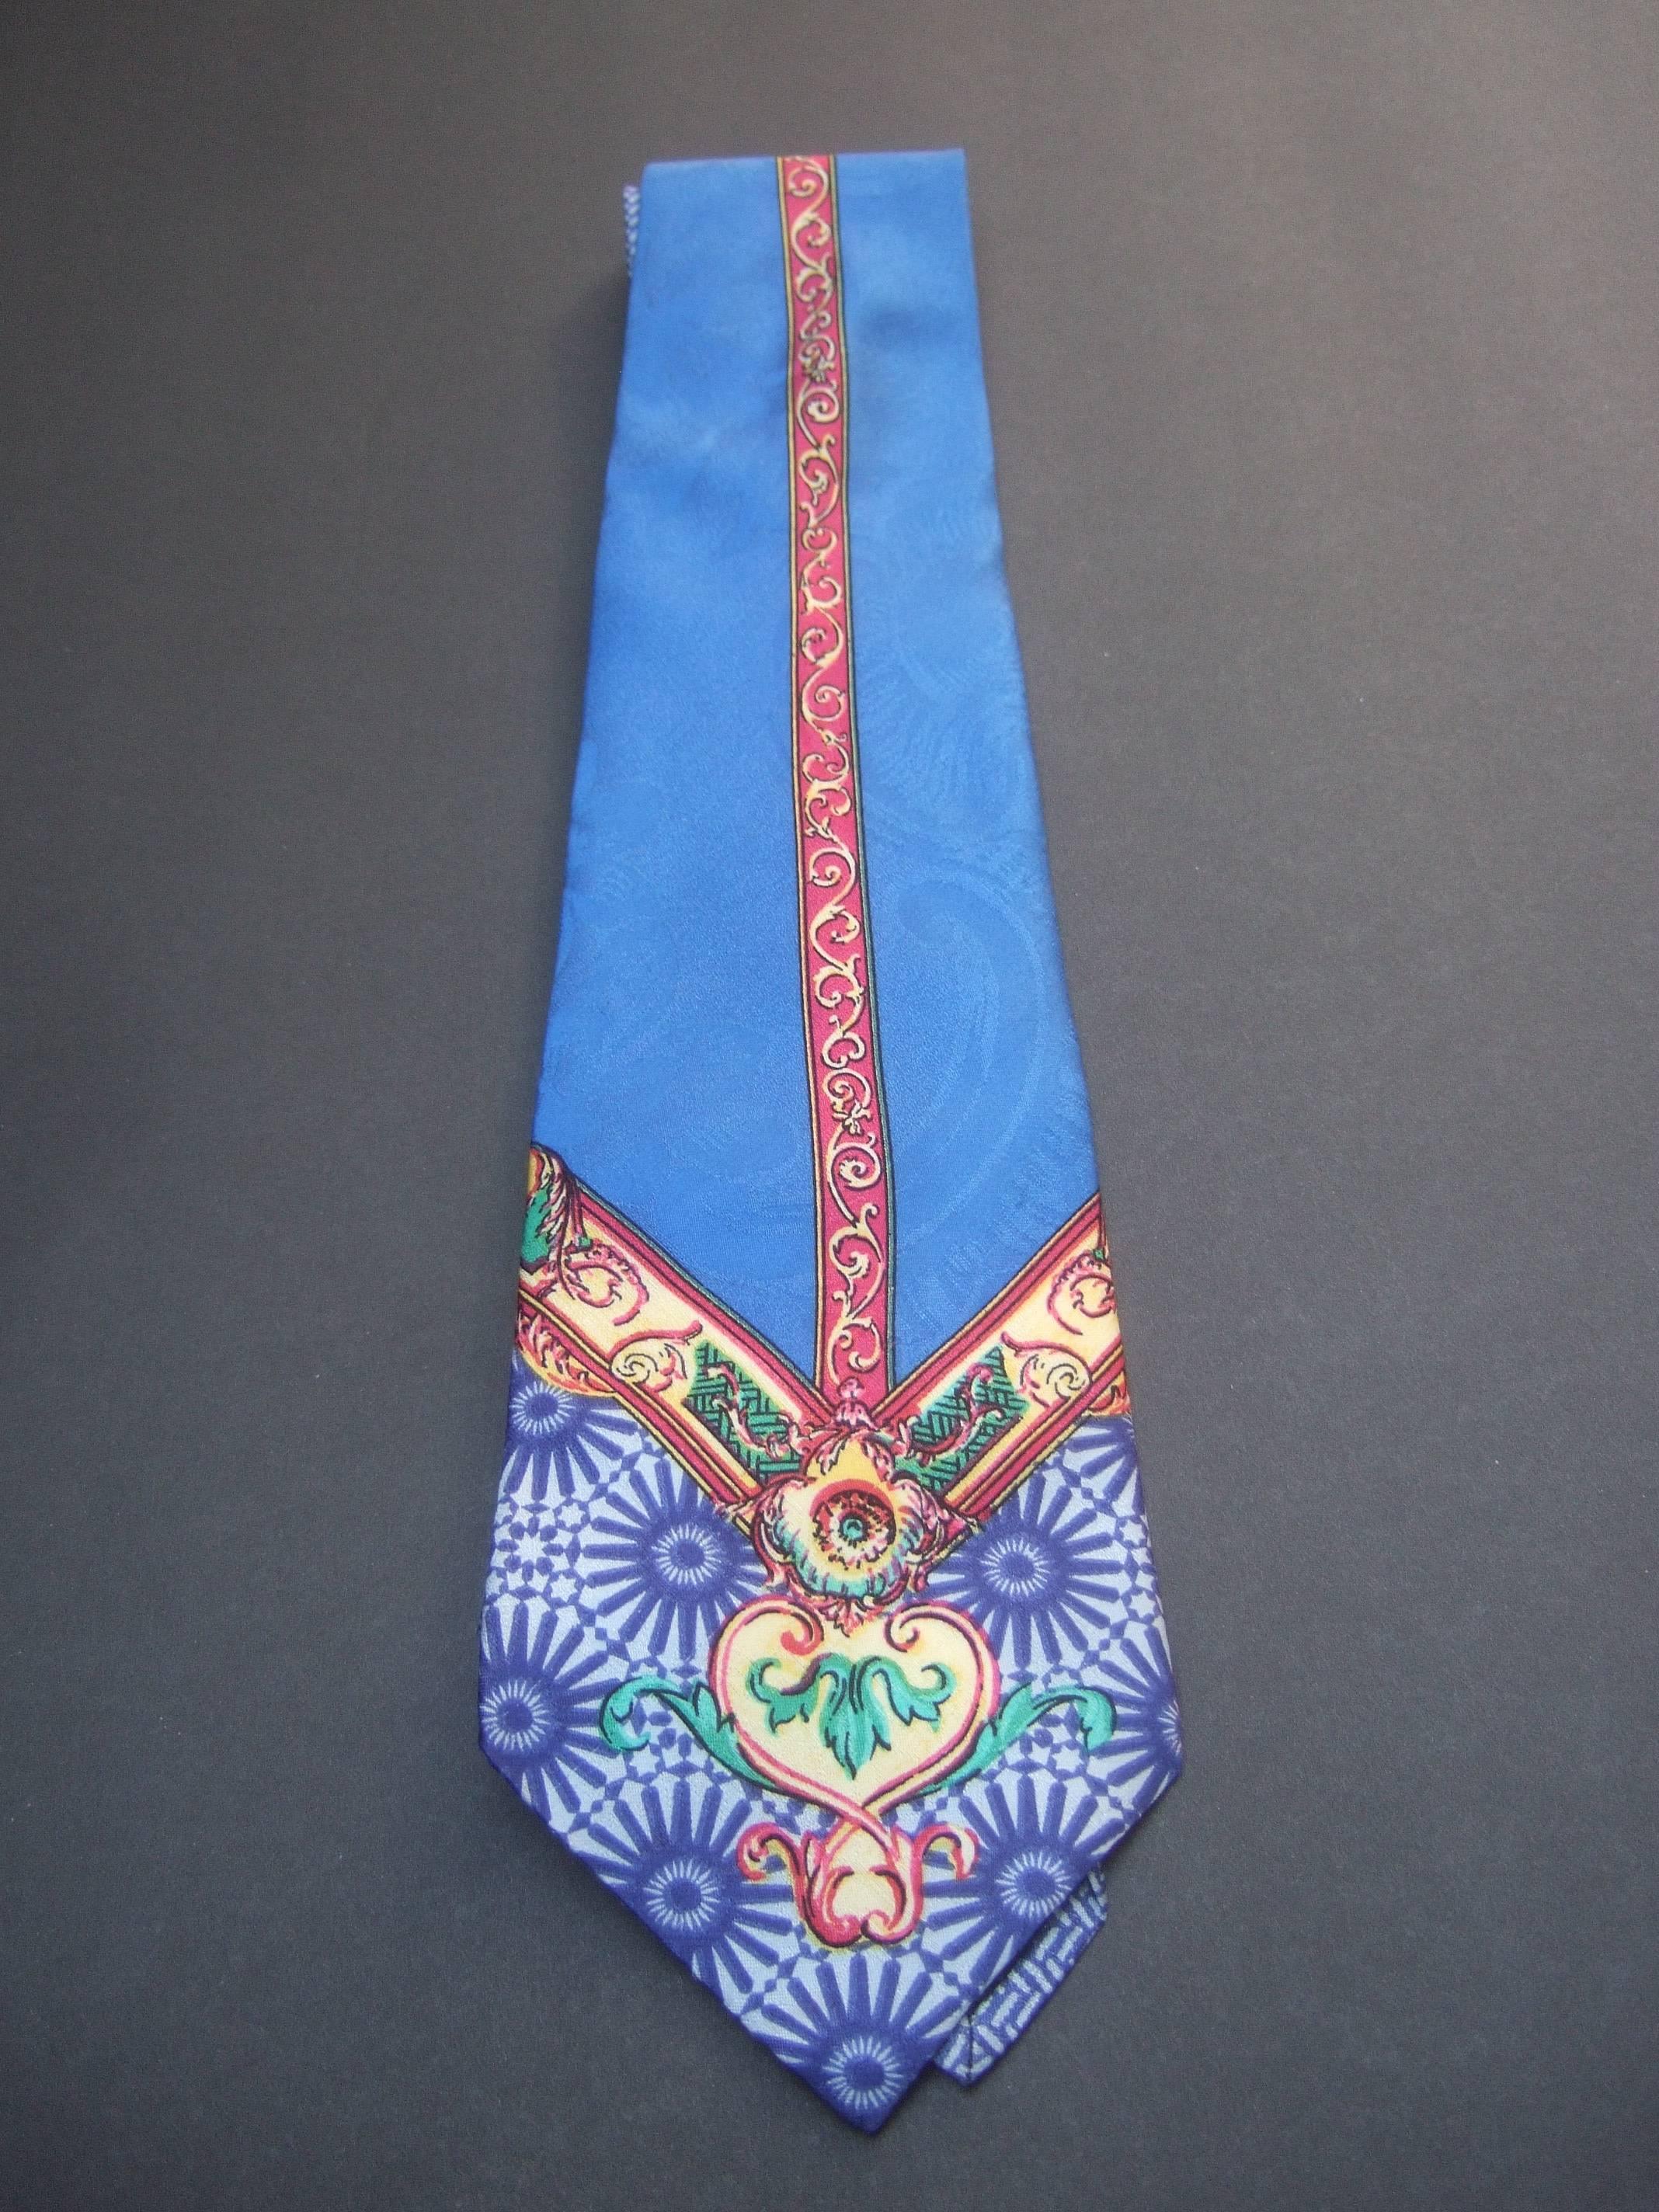 Versace Vibrant silk graphic print necktie 
The high fashion necktie is illustrated 
with lapis blue combined with scrolled
golden accents 

Epitomizes Versace's signature bold
eye catching prints

Labeled Gianni Versace 

The widest